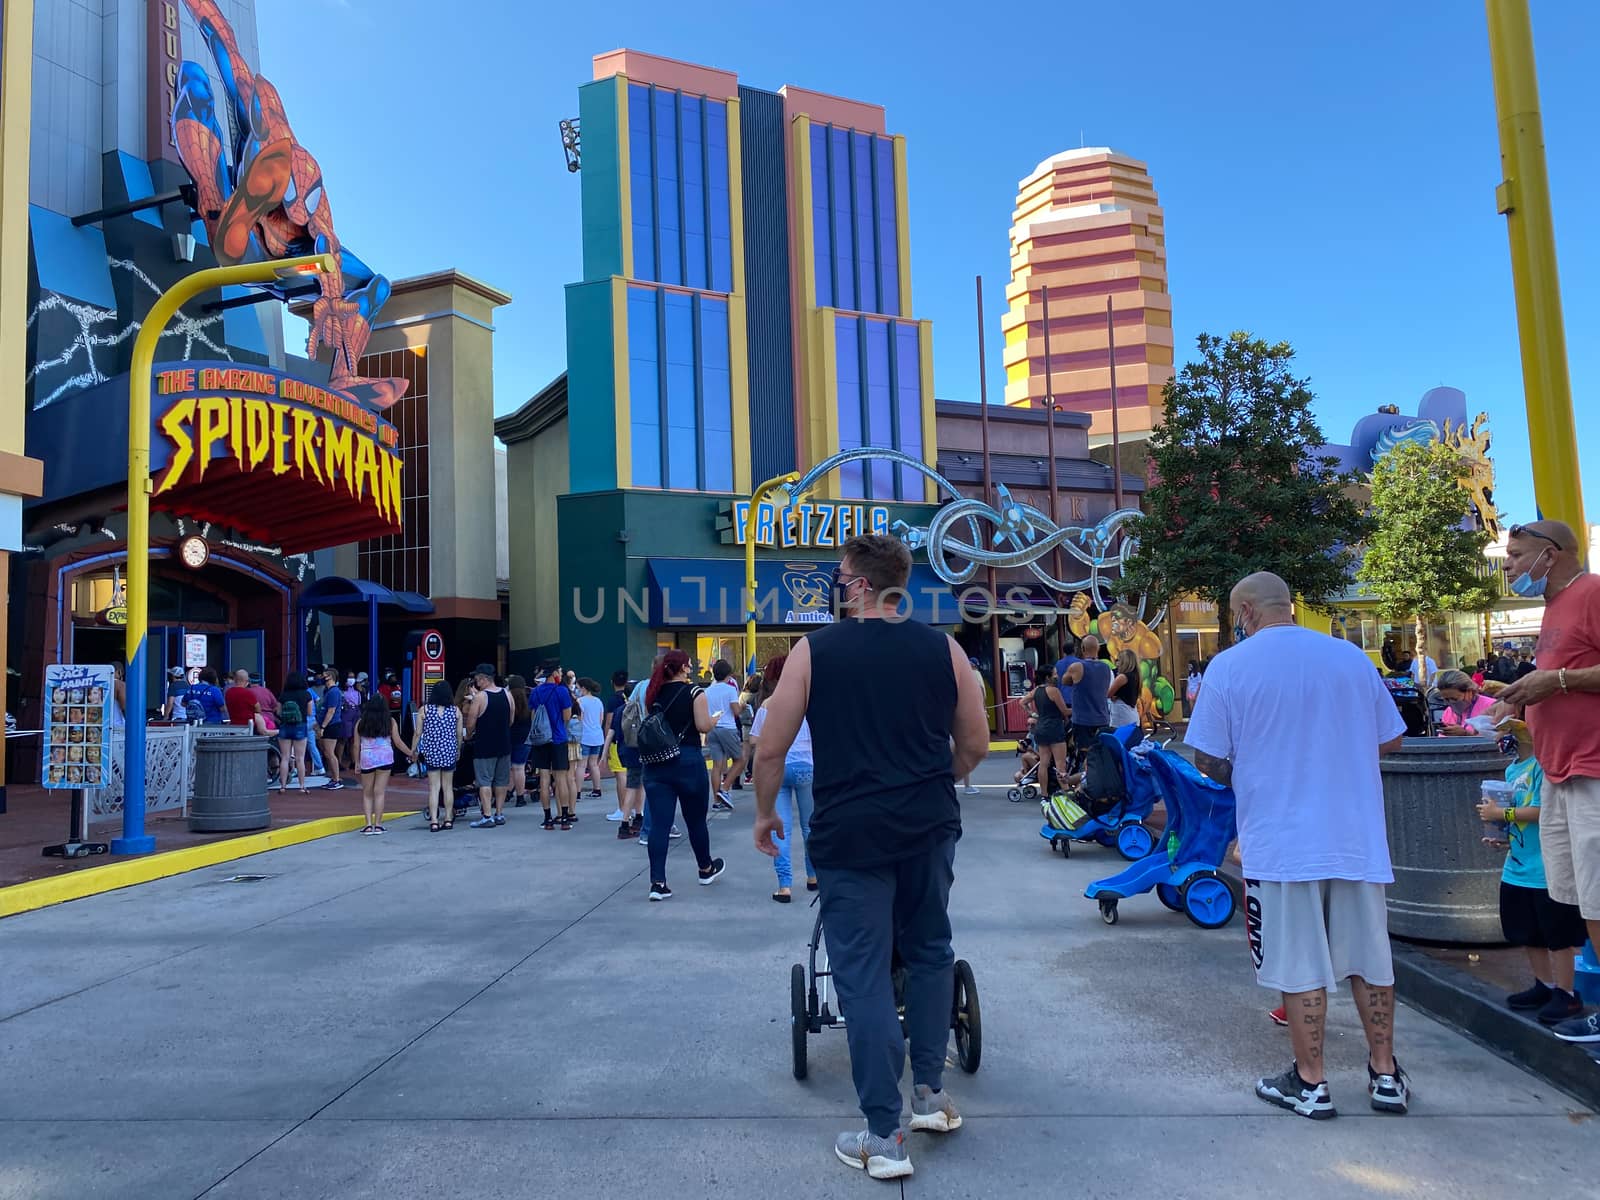 Orlando,FL/USA-10/18/20: People walking  in front of the Marvel area at Universal Studios Resort theme park wearing face masks and social distancing due to the coronavirus pandemic.